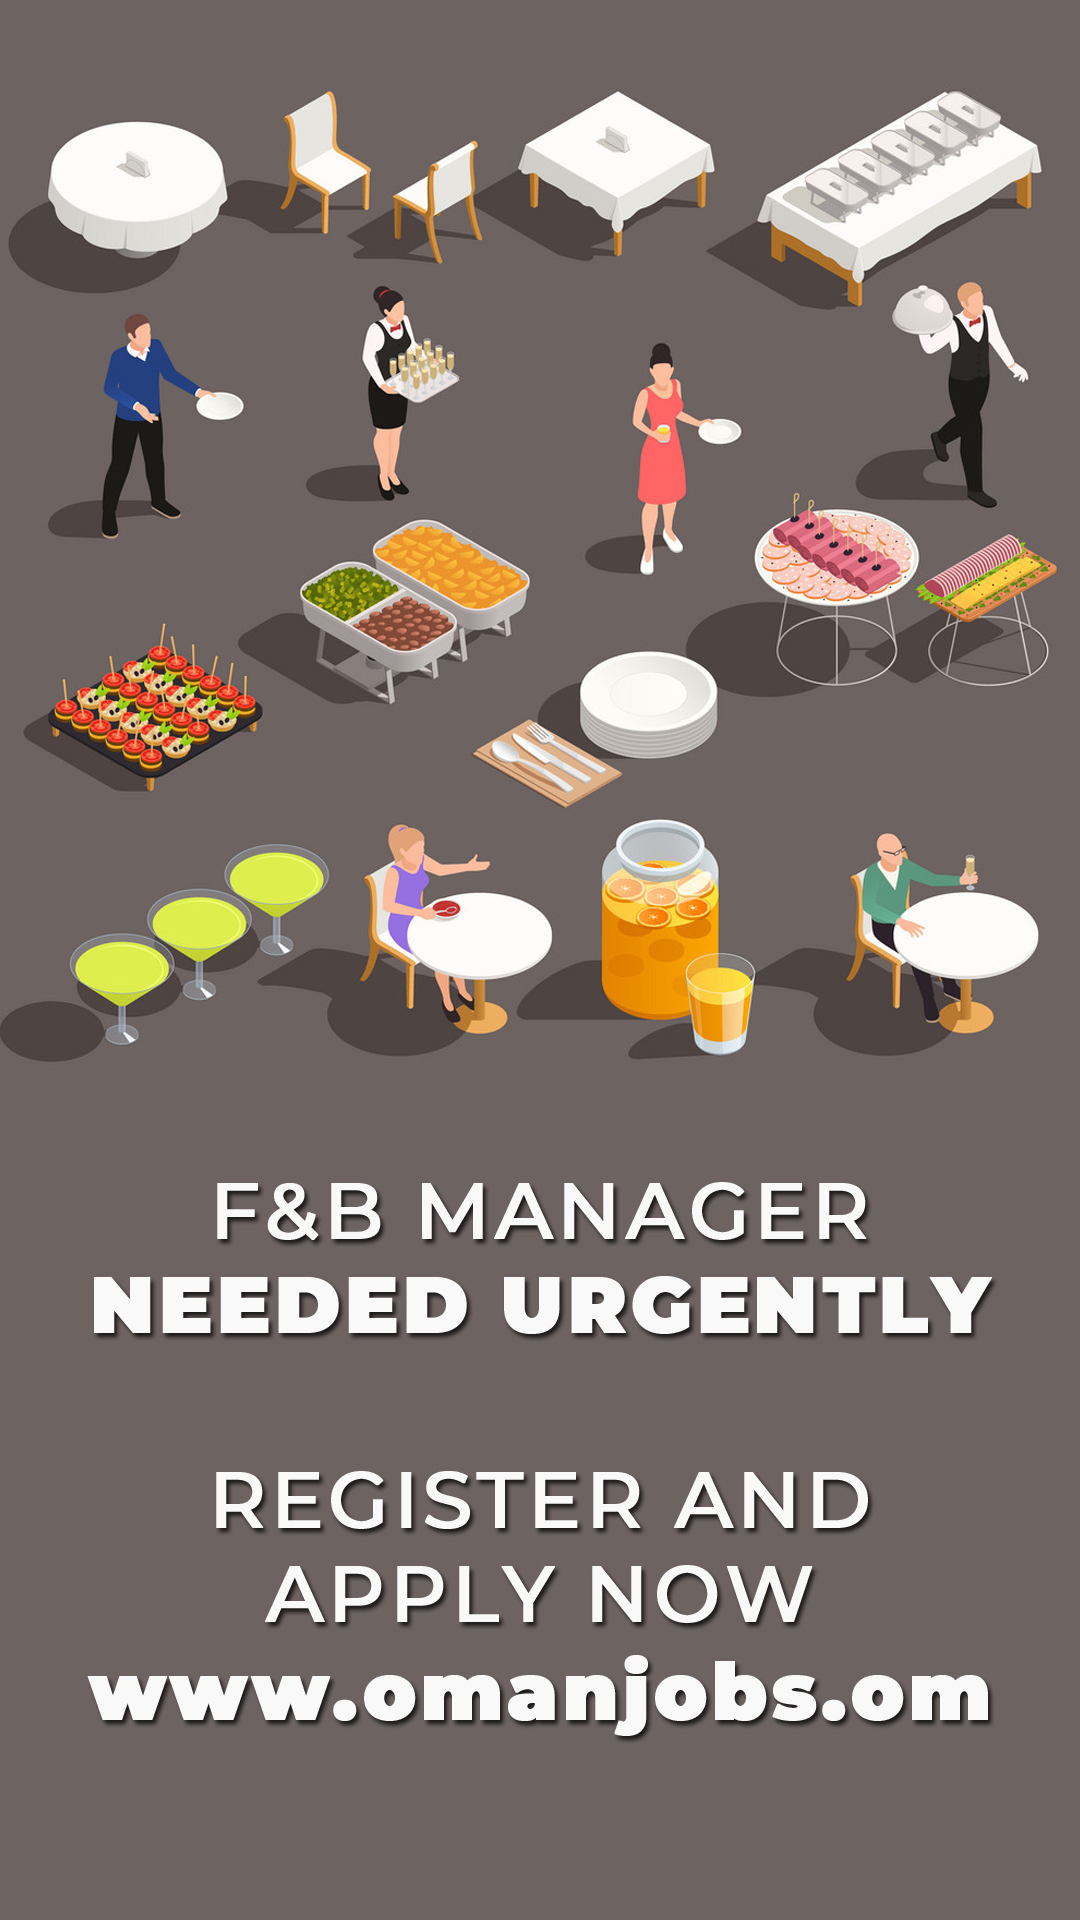 F&B MANAGER NEEDED URGENTLY 